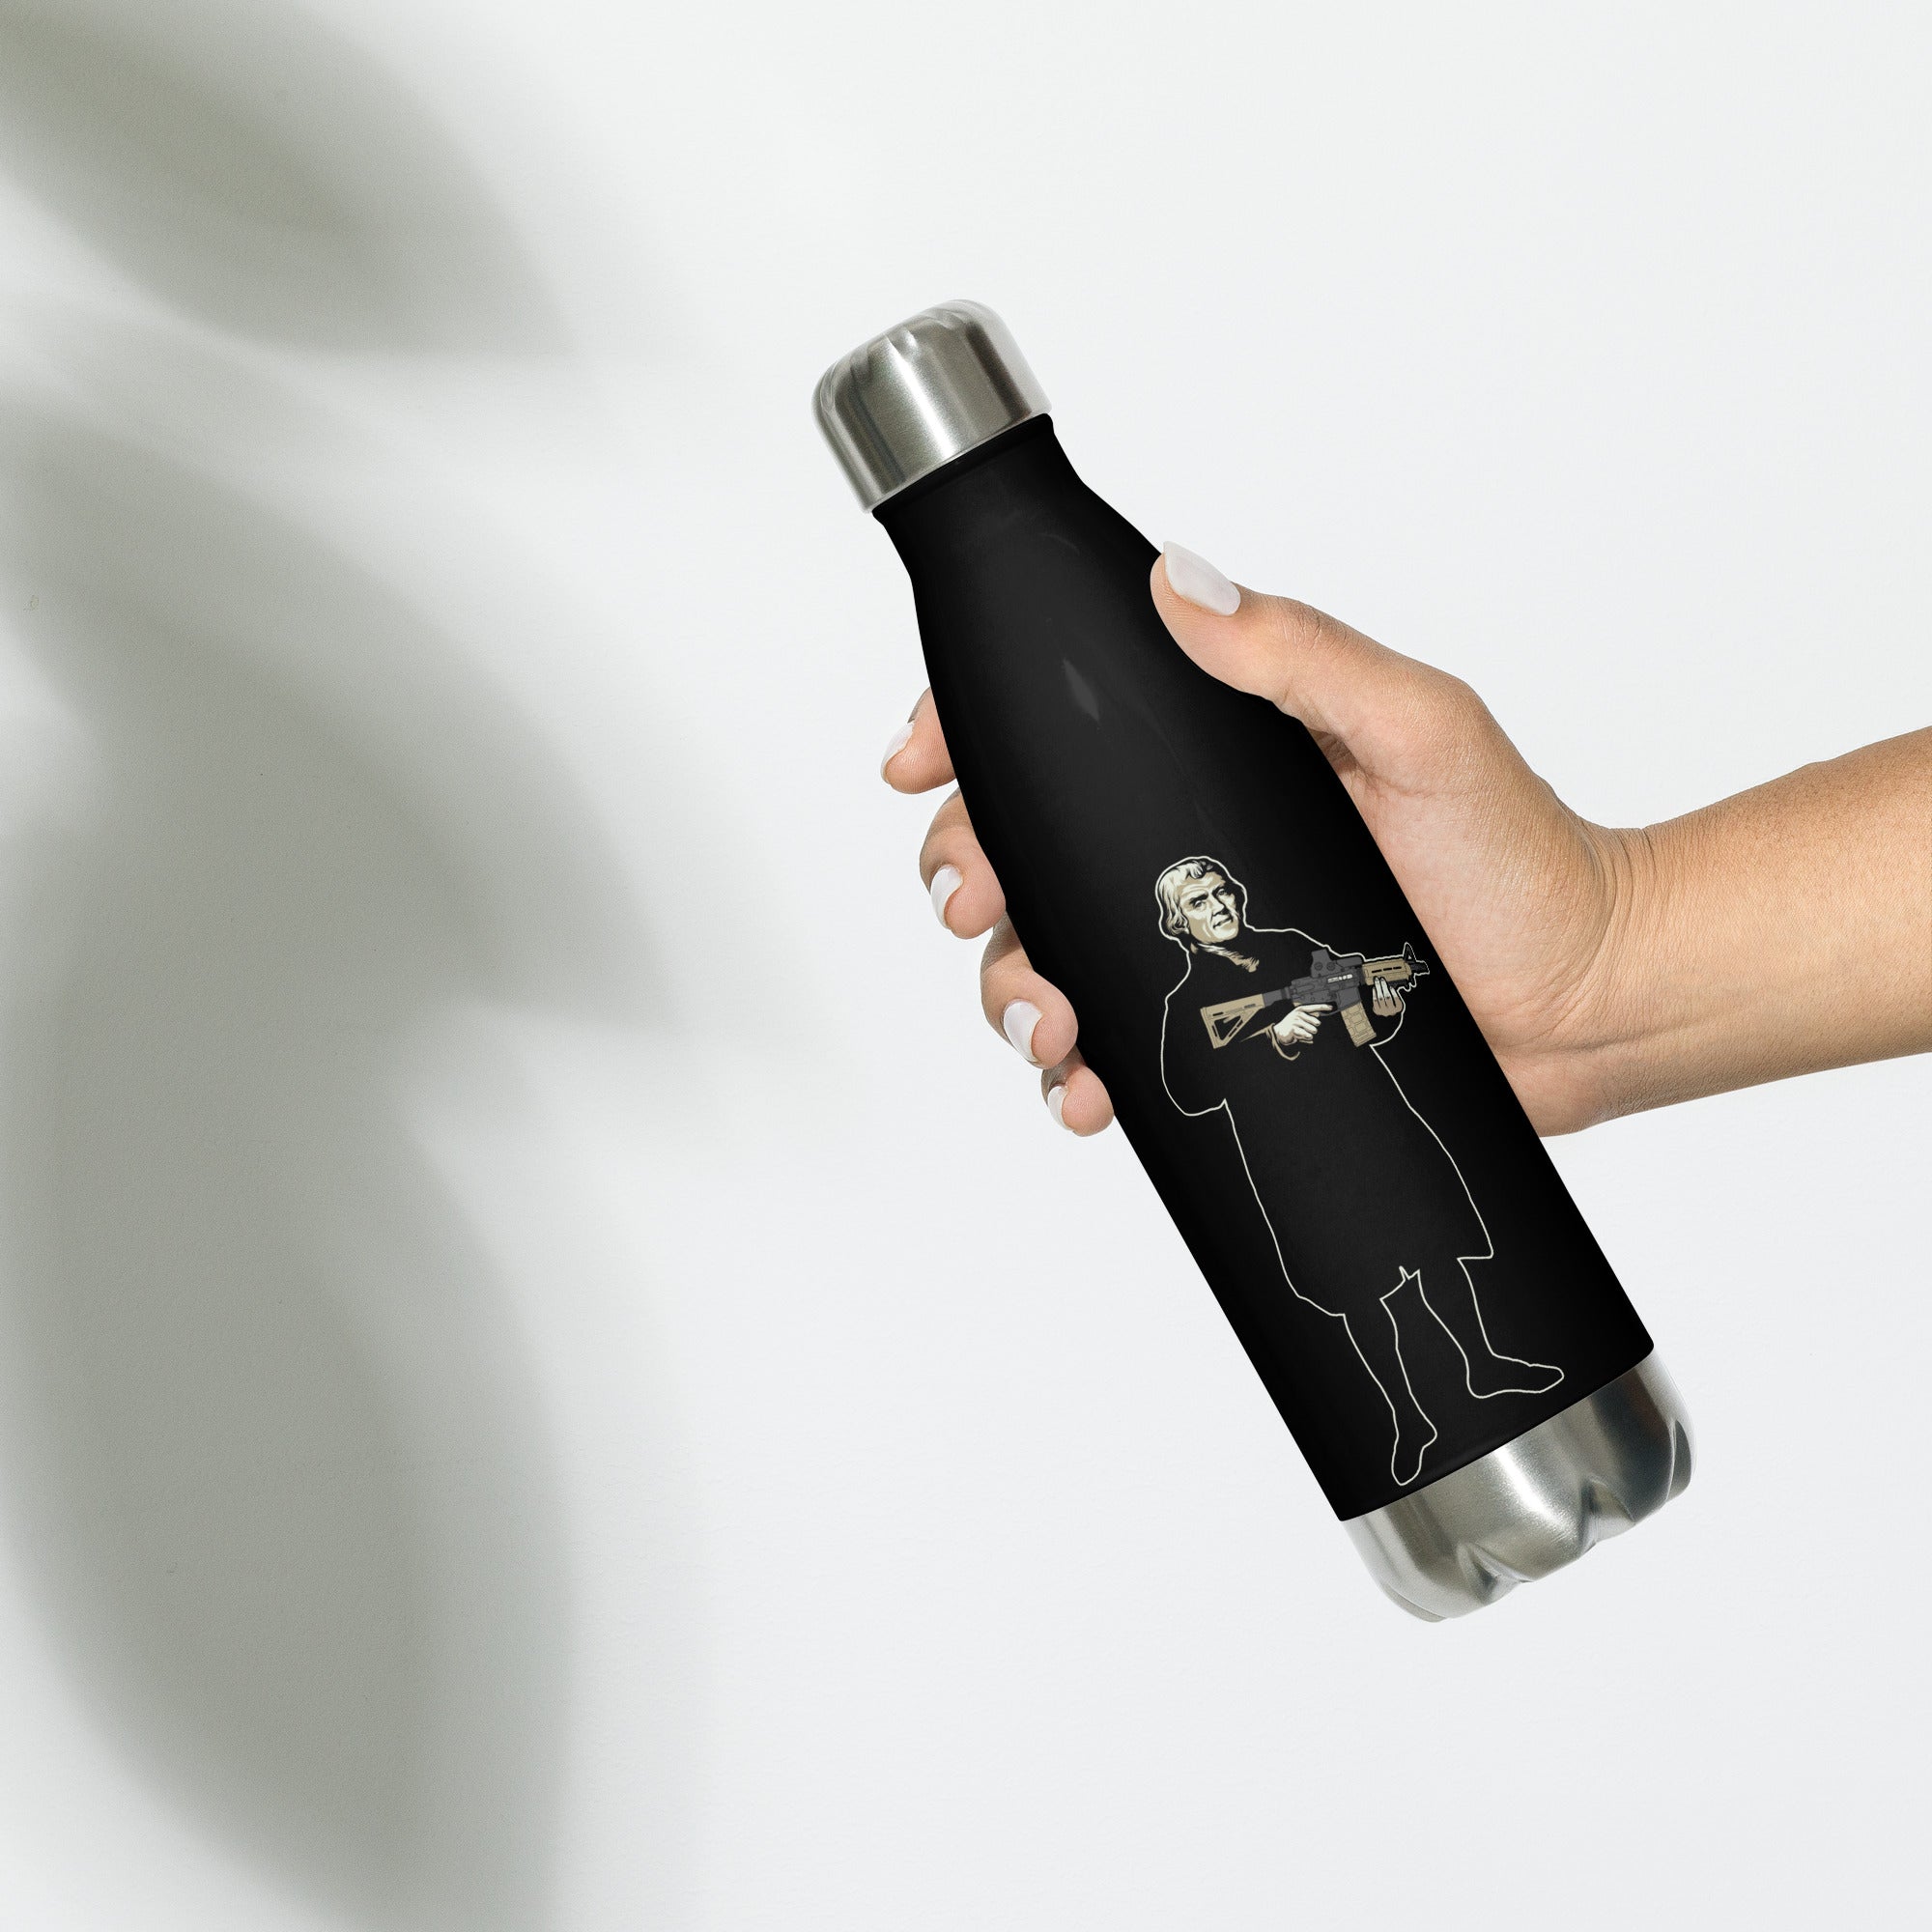 Thomas Jefferson Holding a Carbine Stainless Steel Water Bottle